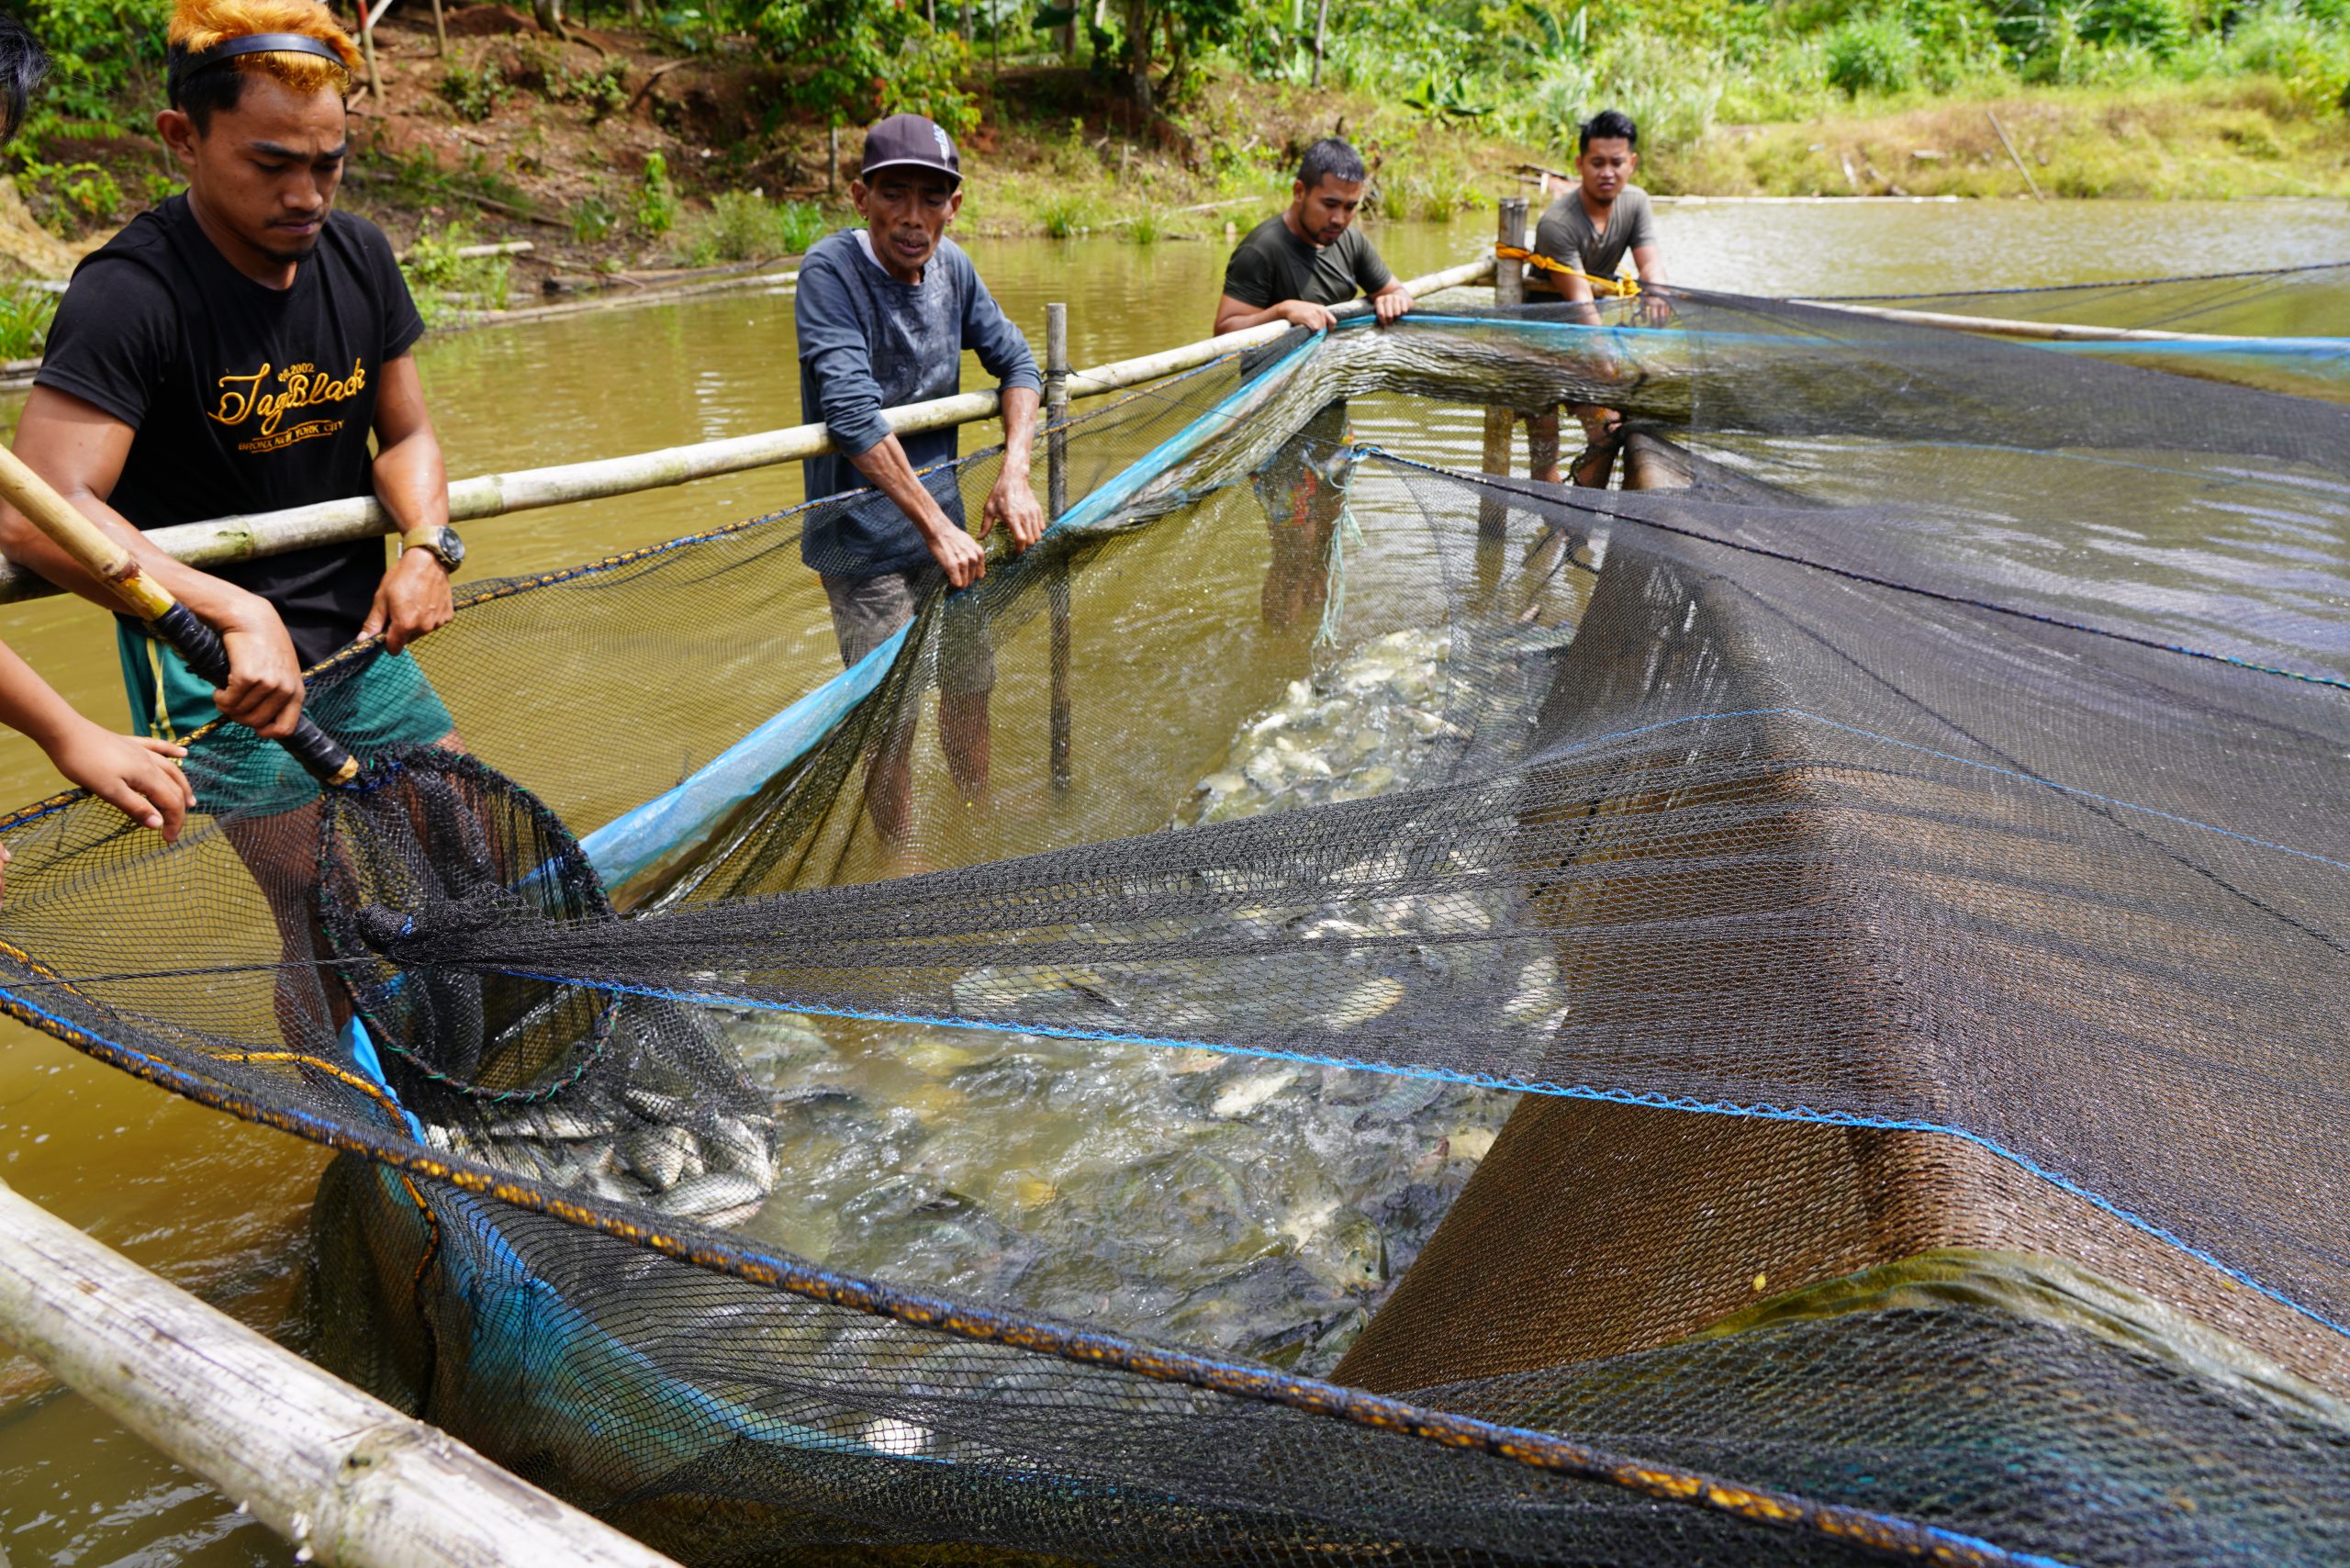 41 IP youth members earn Php 89k from BFAR-SAAD’s tilapia grow-out culture